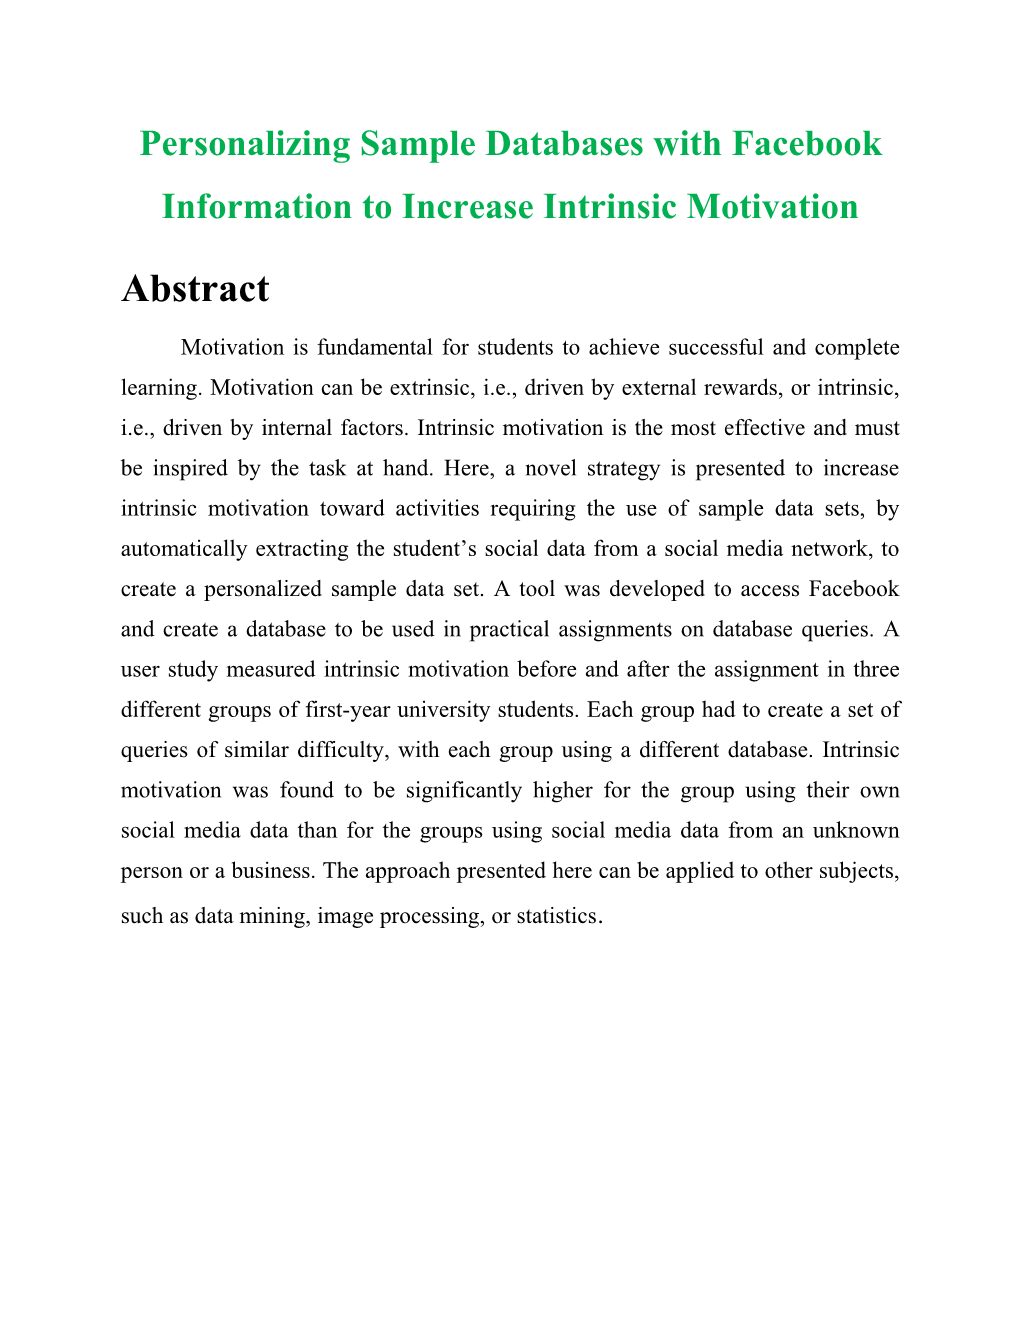 Personalizing Sample Databases with Facebook Information to Increase Intrinsic Motivation